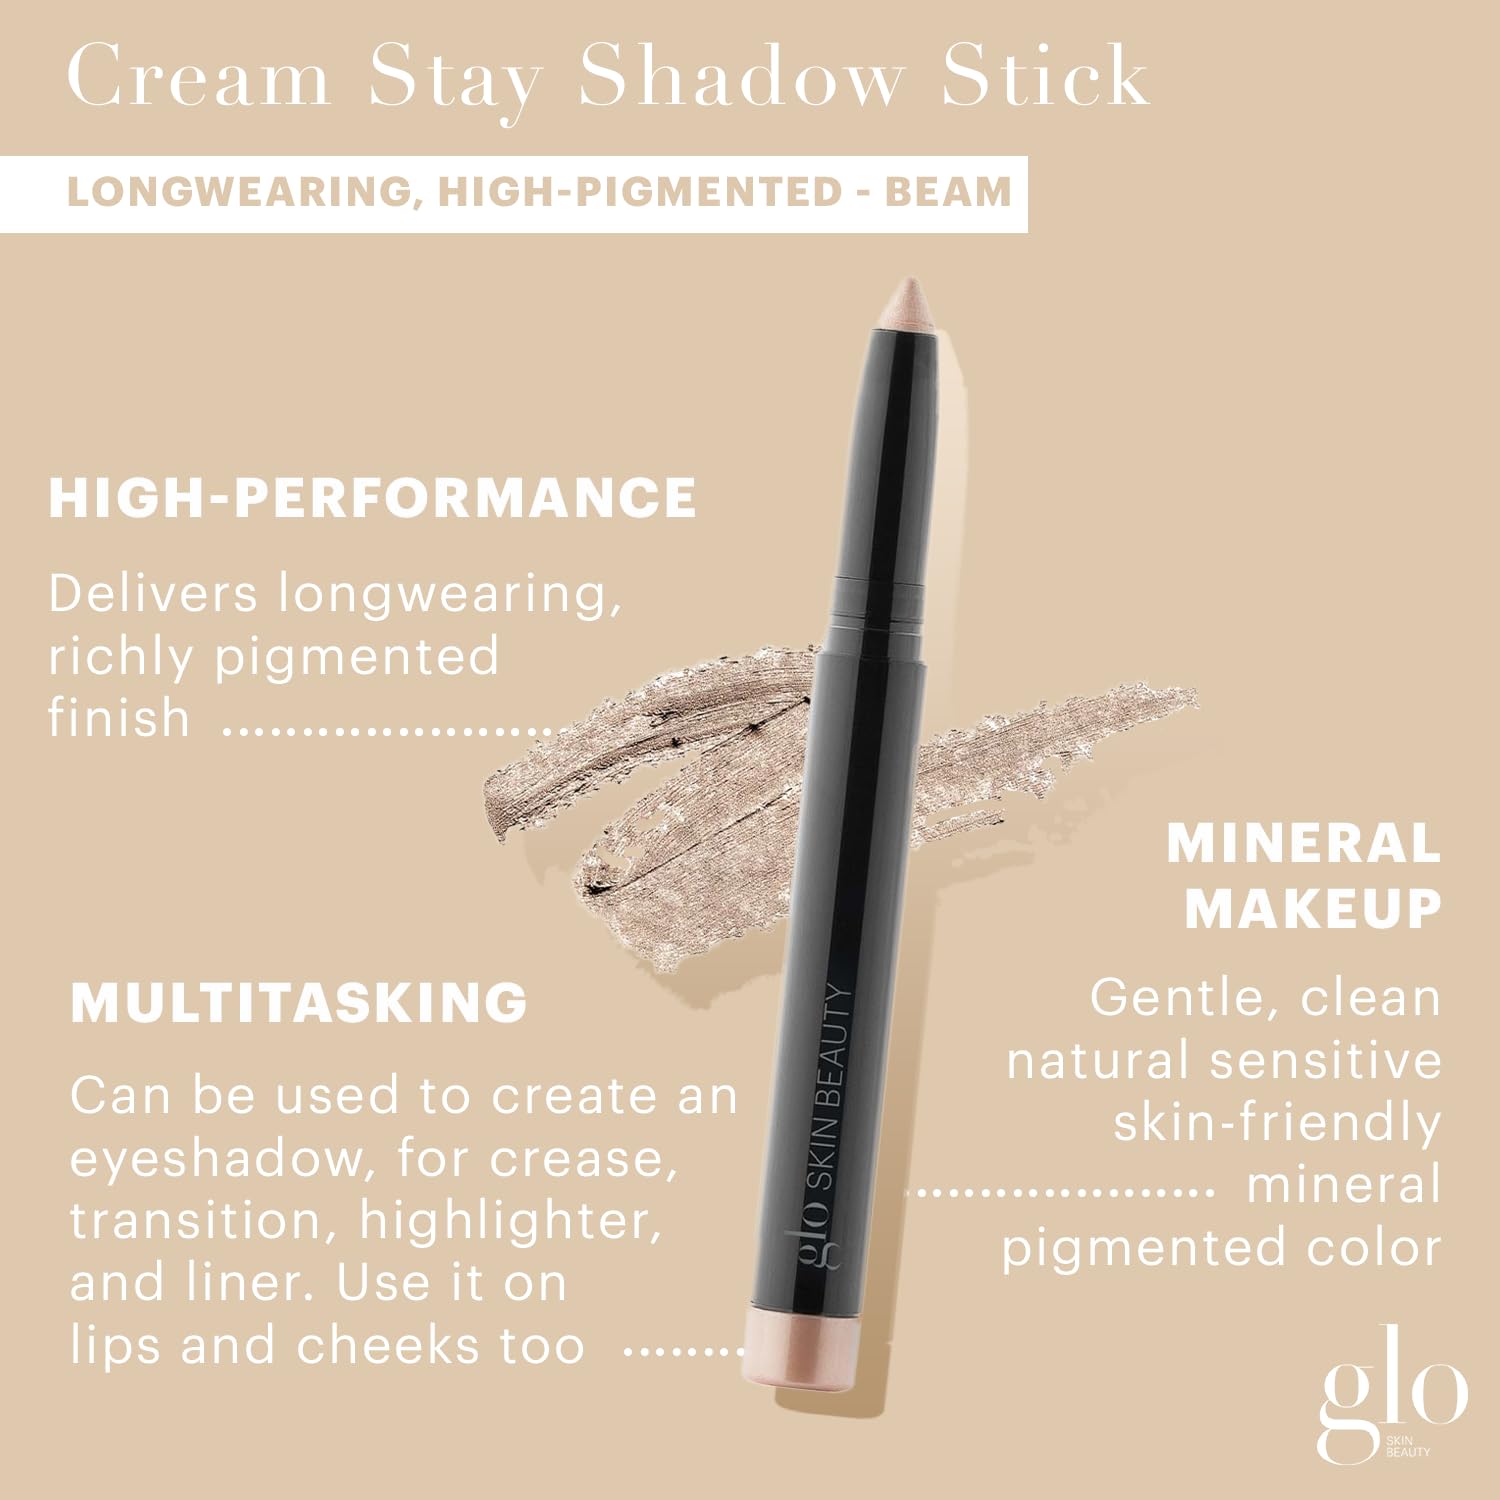 Glo Skin Beauty Cream Stay Shadow Stick (Beam) - Multi-Purpose Eyeshadow Mineral Makeup Can Also Be Used as Liner on Lips or Cheeks, 12-Hours of Wear